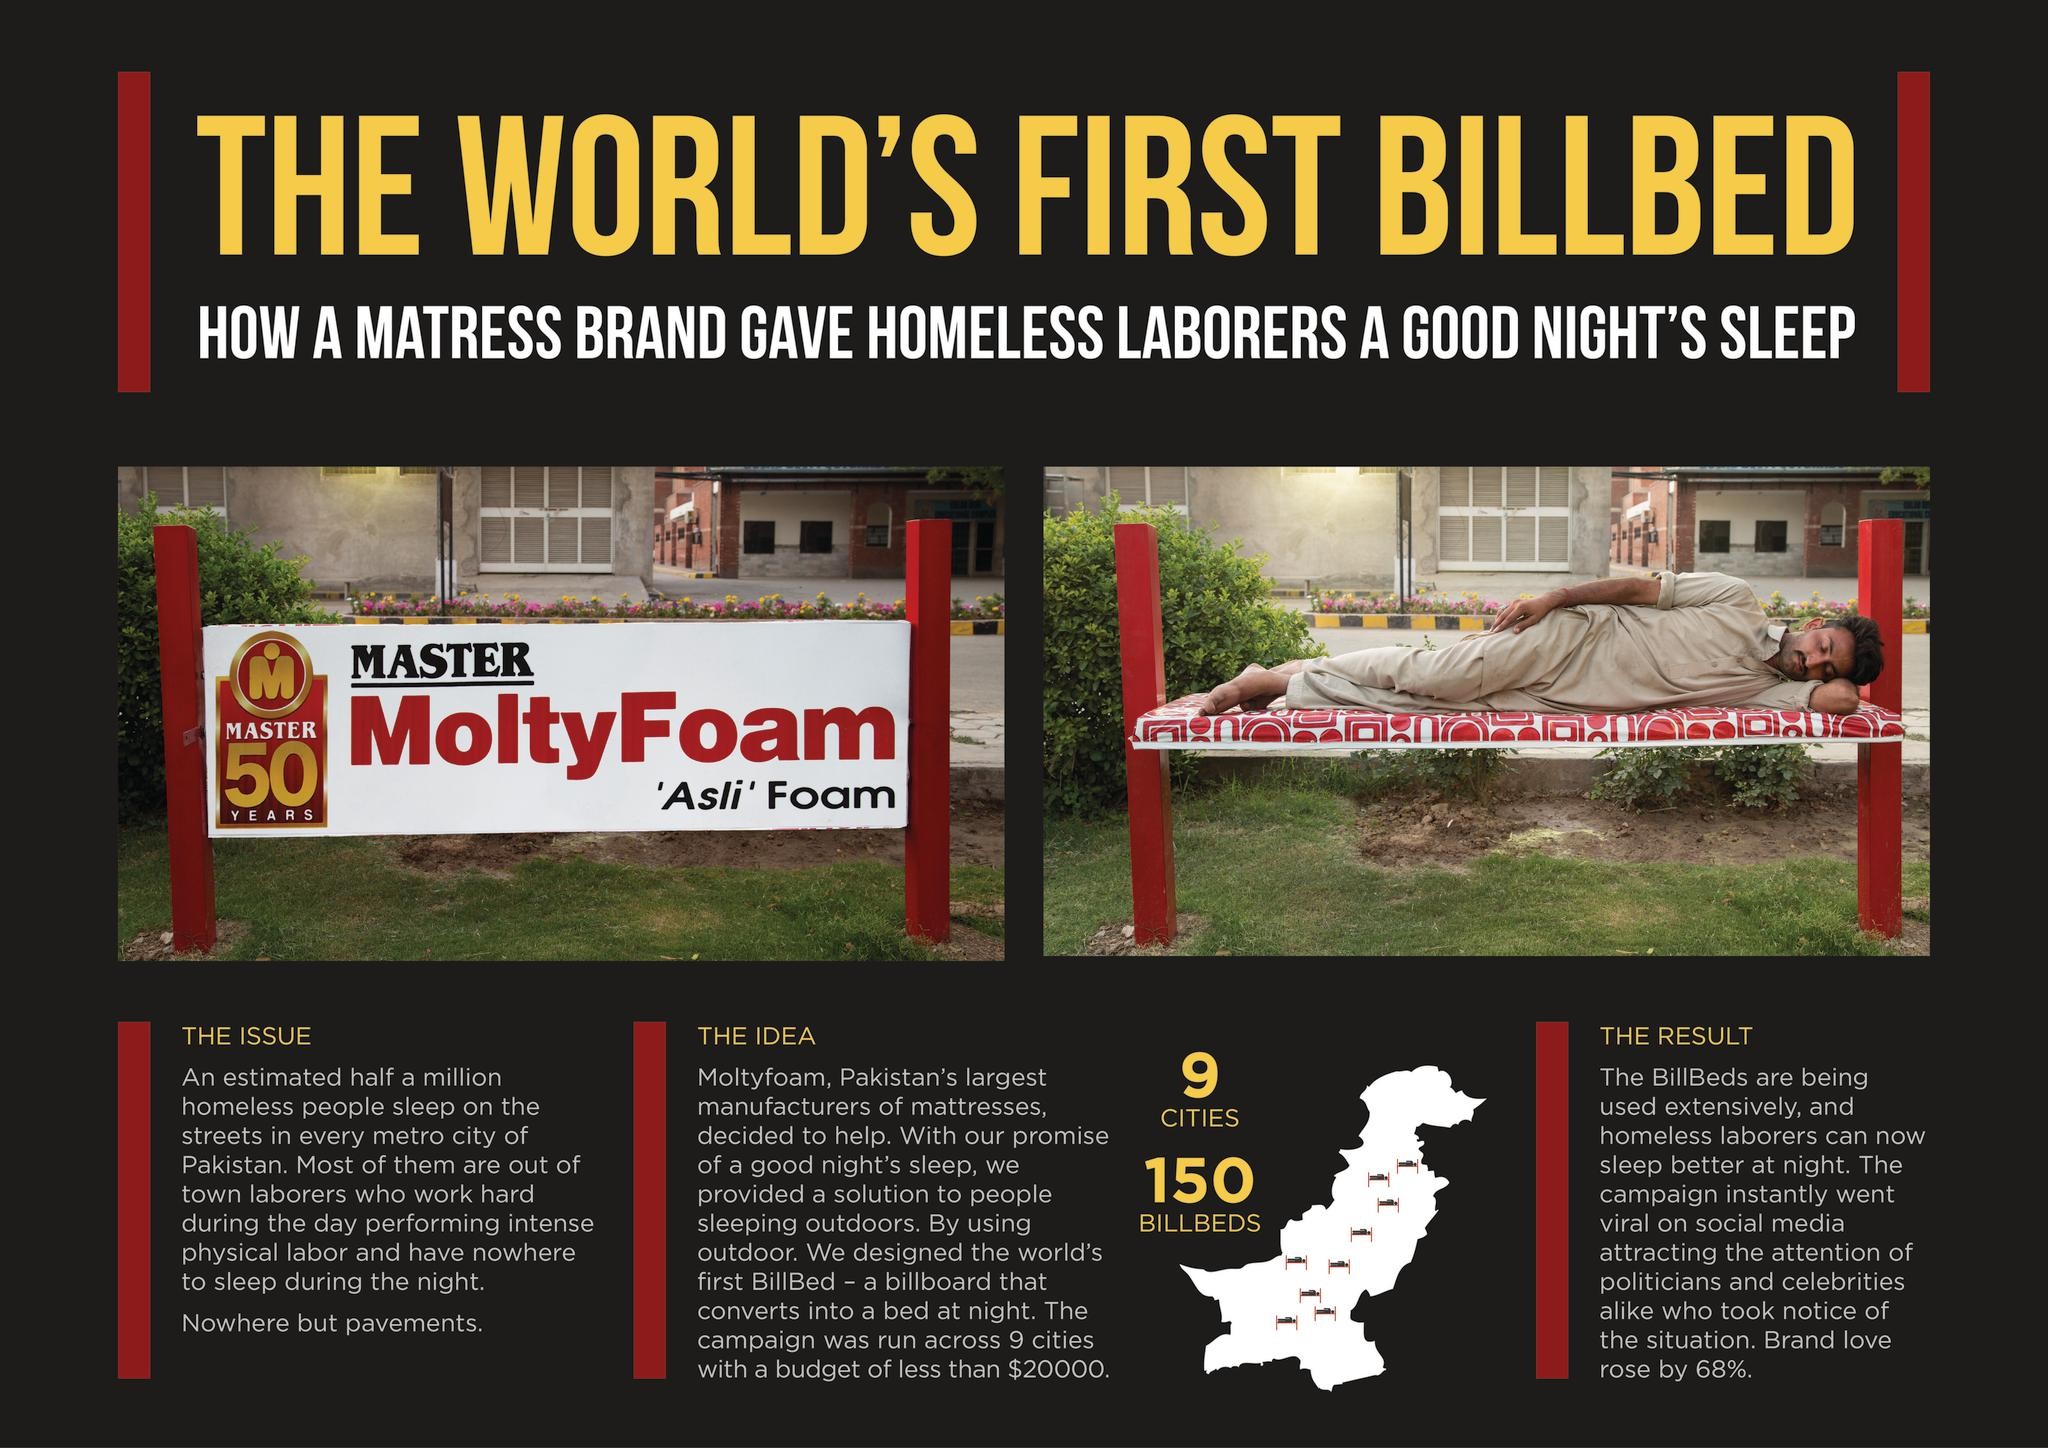 THE WORLD'S FIRST BILLBED